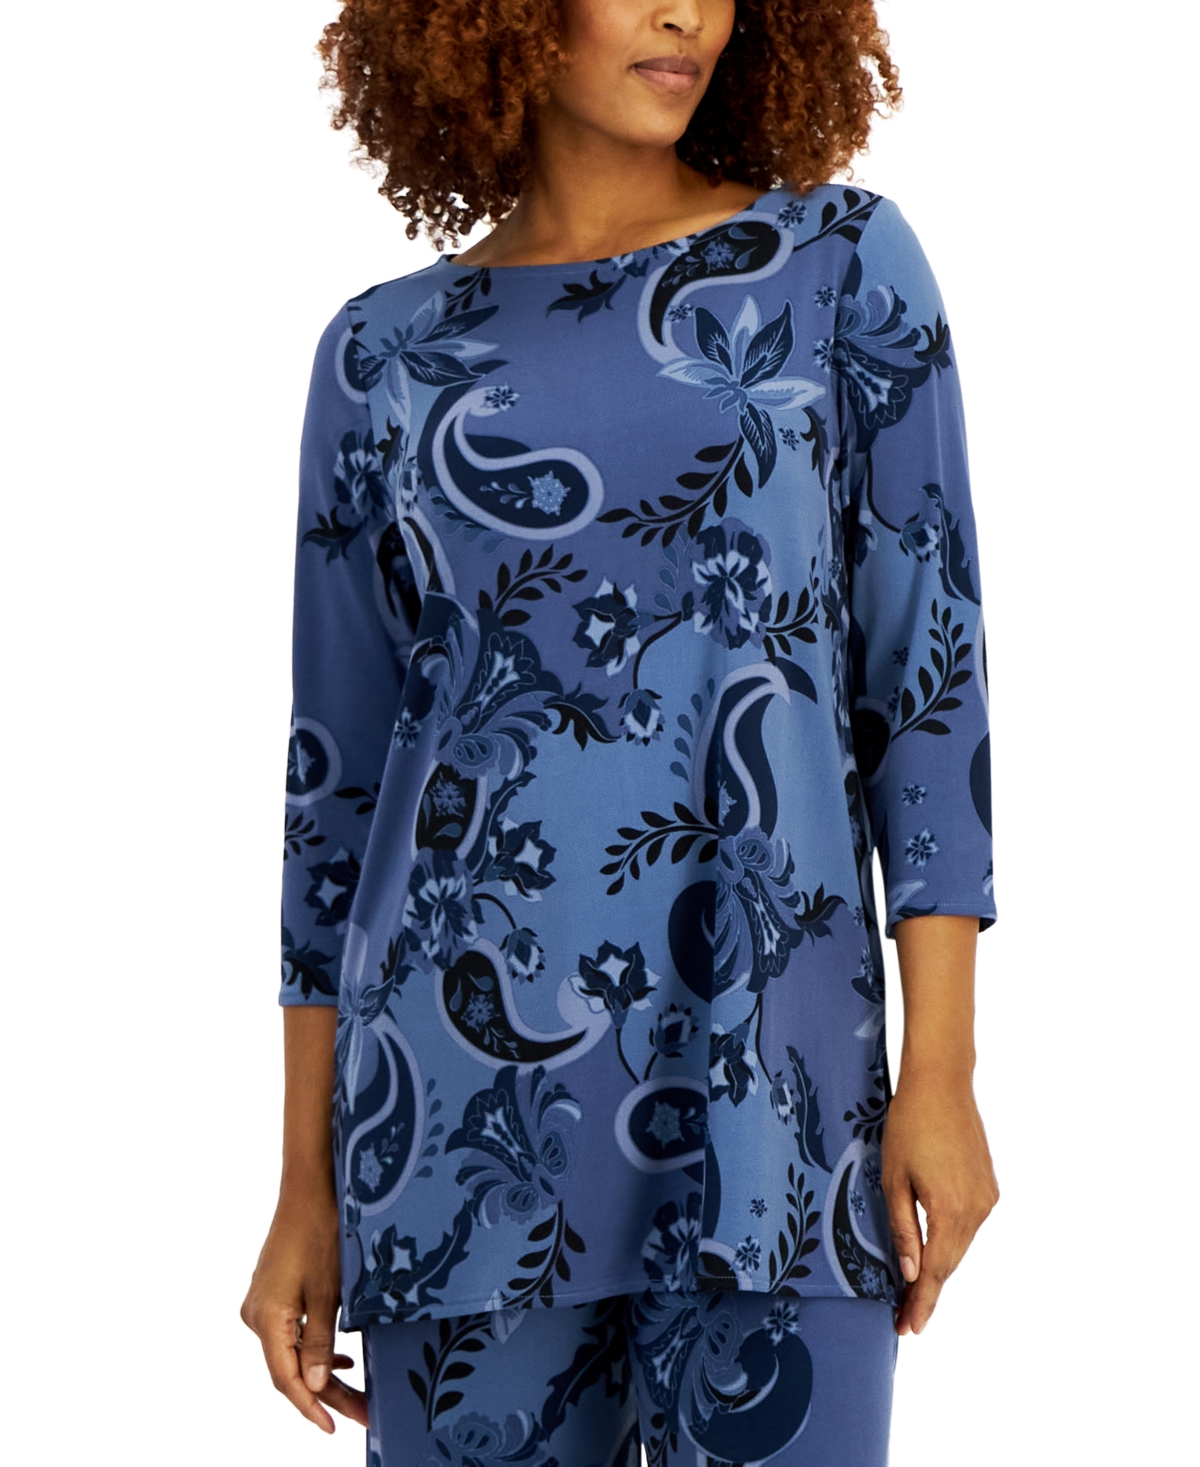 Women's Printed Boat-Neck Tunic Top, Created for Macy's - Intrepid Blue Combo